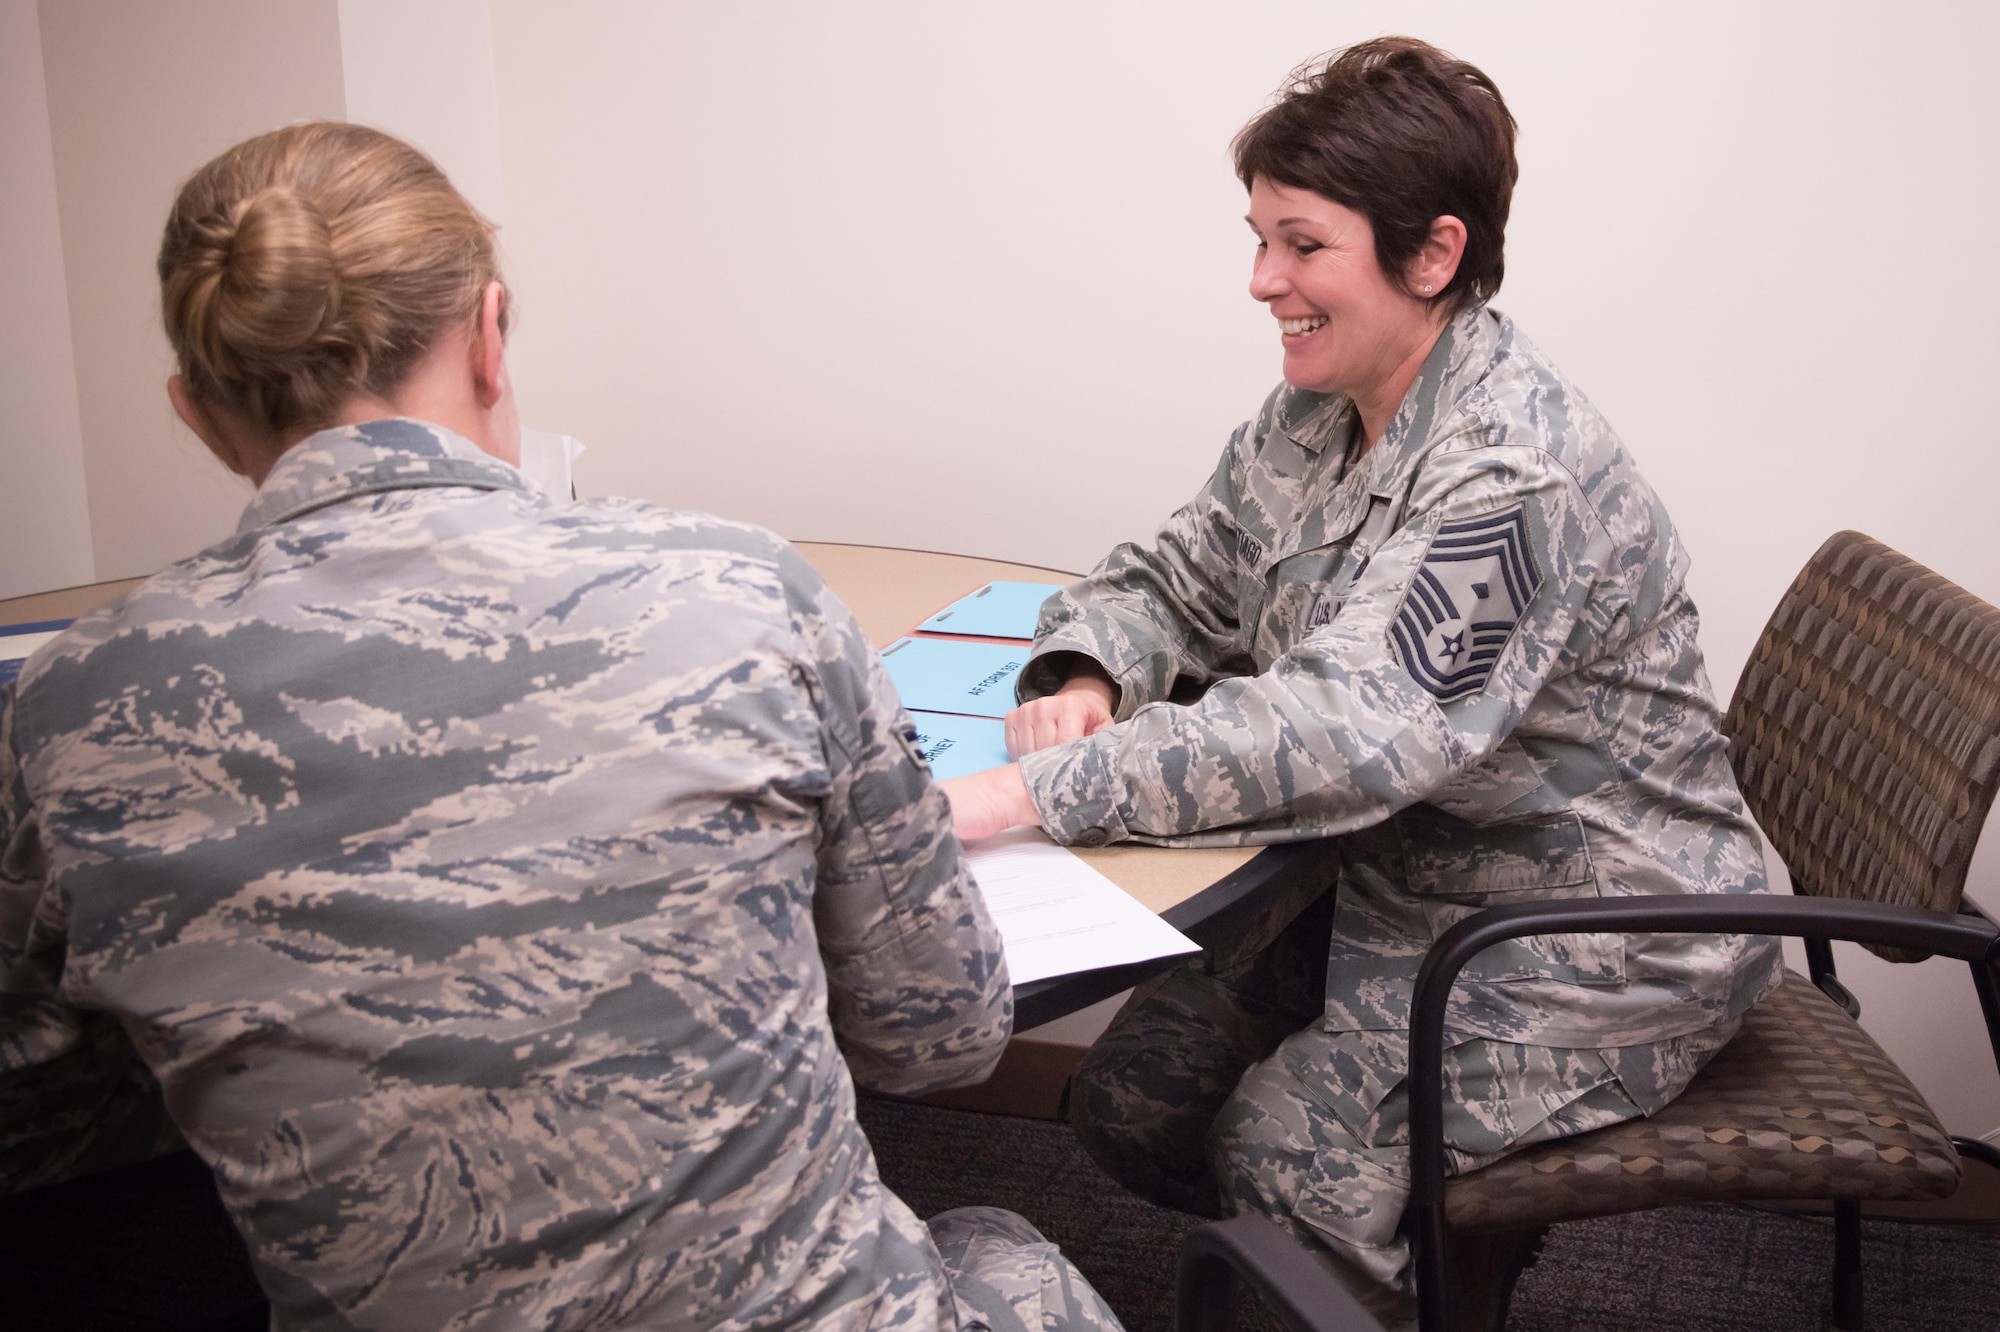 Chief Master Sgt. Michelle Santiago, 403rd Maintenance Squadron first sergeant, helps Airman 1st Class Jennifer Whittington, 403rd MXS aircraft maintainer, fill out paperwork Feb. 12 at Keesler Air Force Base, Mississippi. (U.S. Air Force photo/Staff Sgt. Heather Heiney)